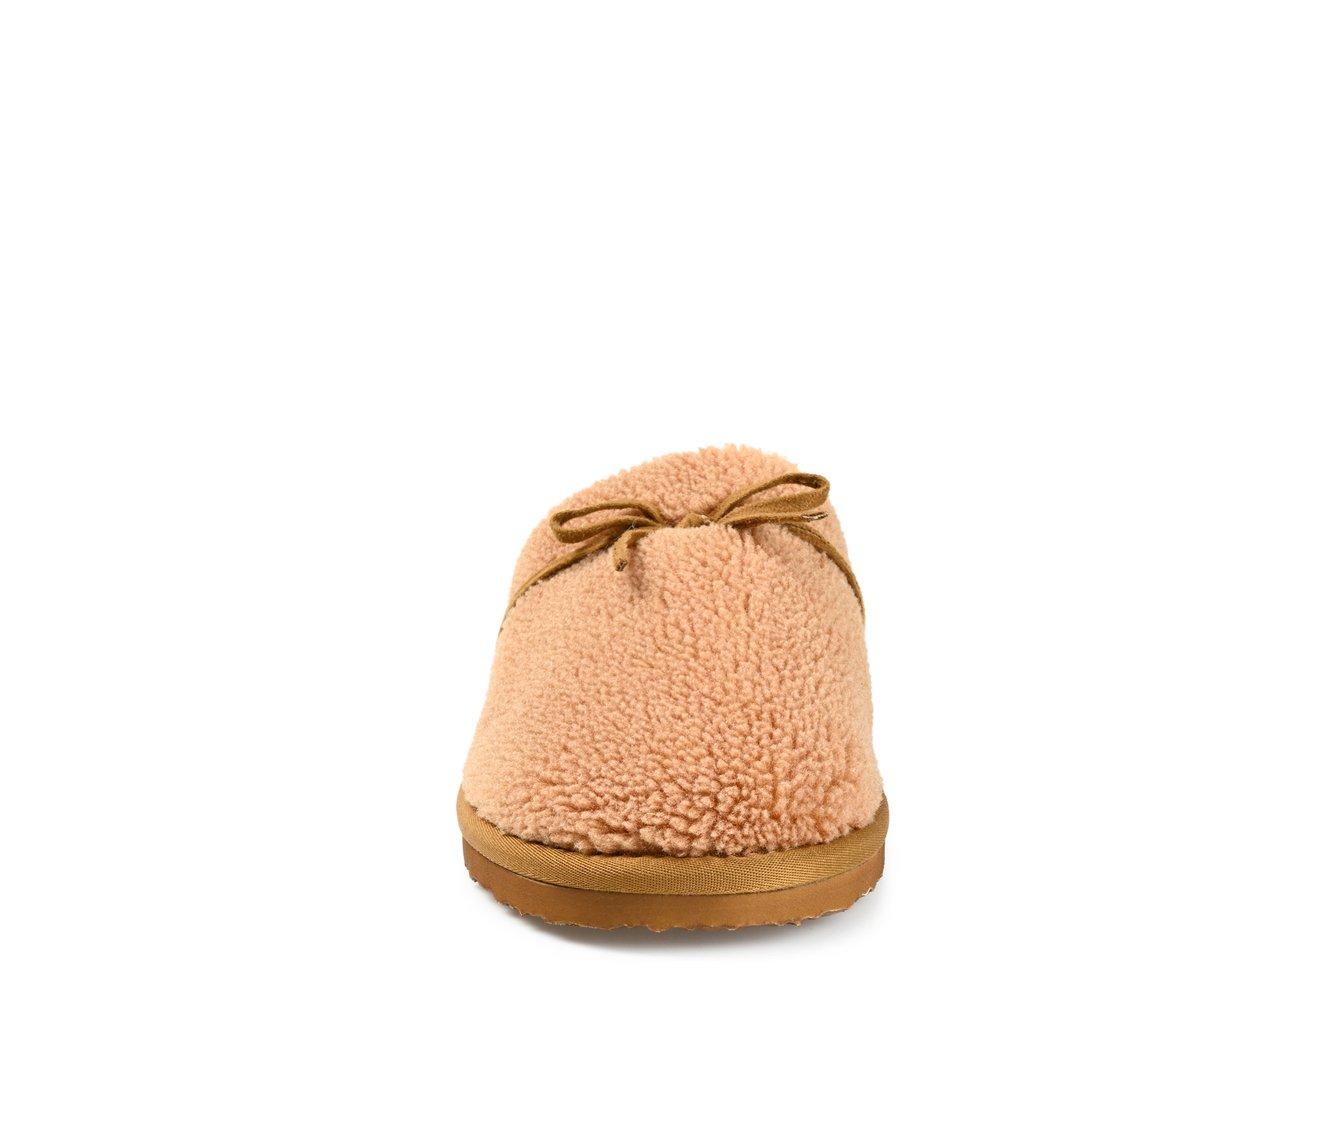 Journee Collection Melodie Slippers